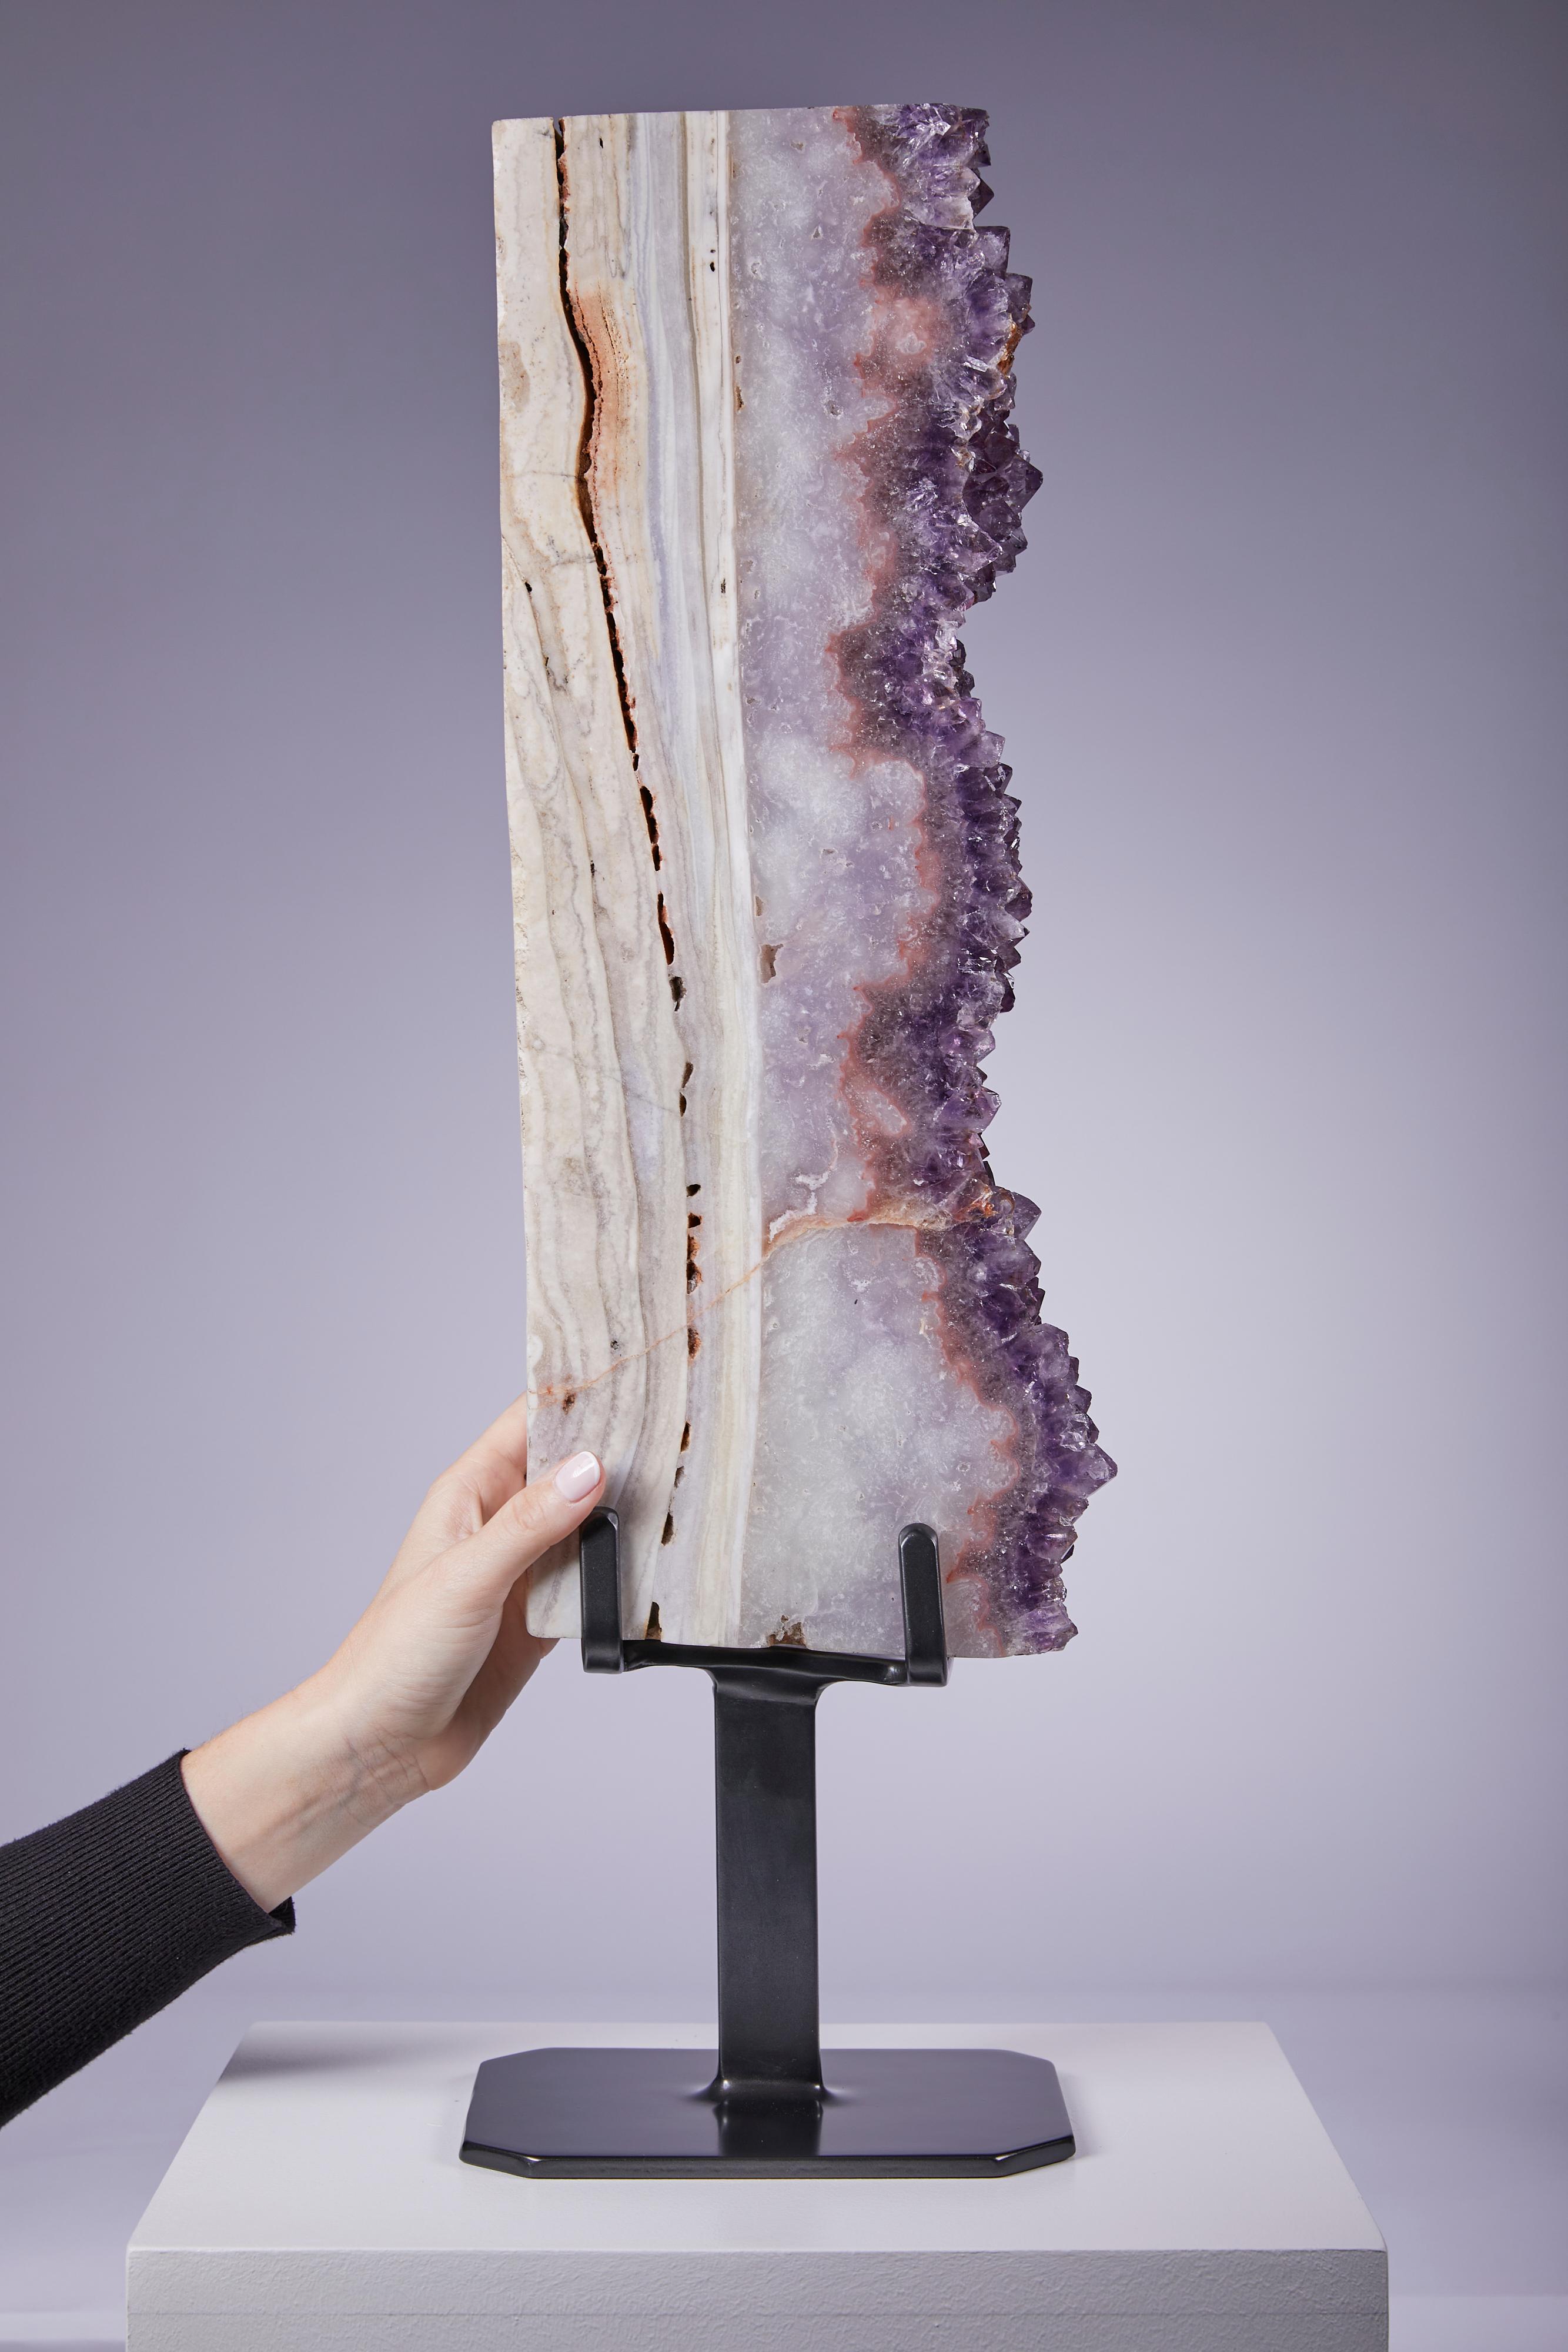 Striking large vertical presentation displaying vibrant purple amethyst bordered by a thick agate layer.  One of a group of four impressive specimens.  Pieces such as this are hard to find owing to the size and shape of the parent geode required to